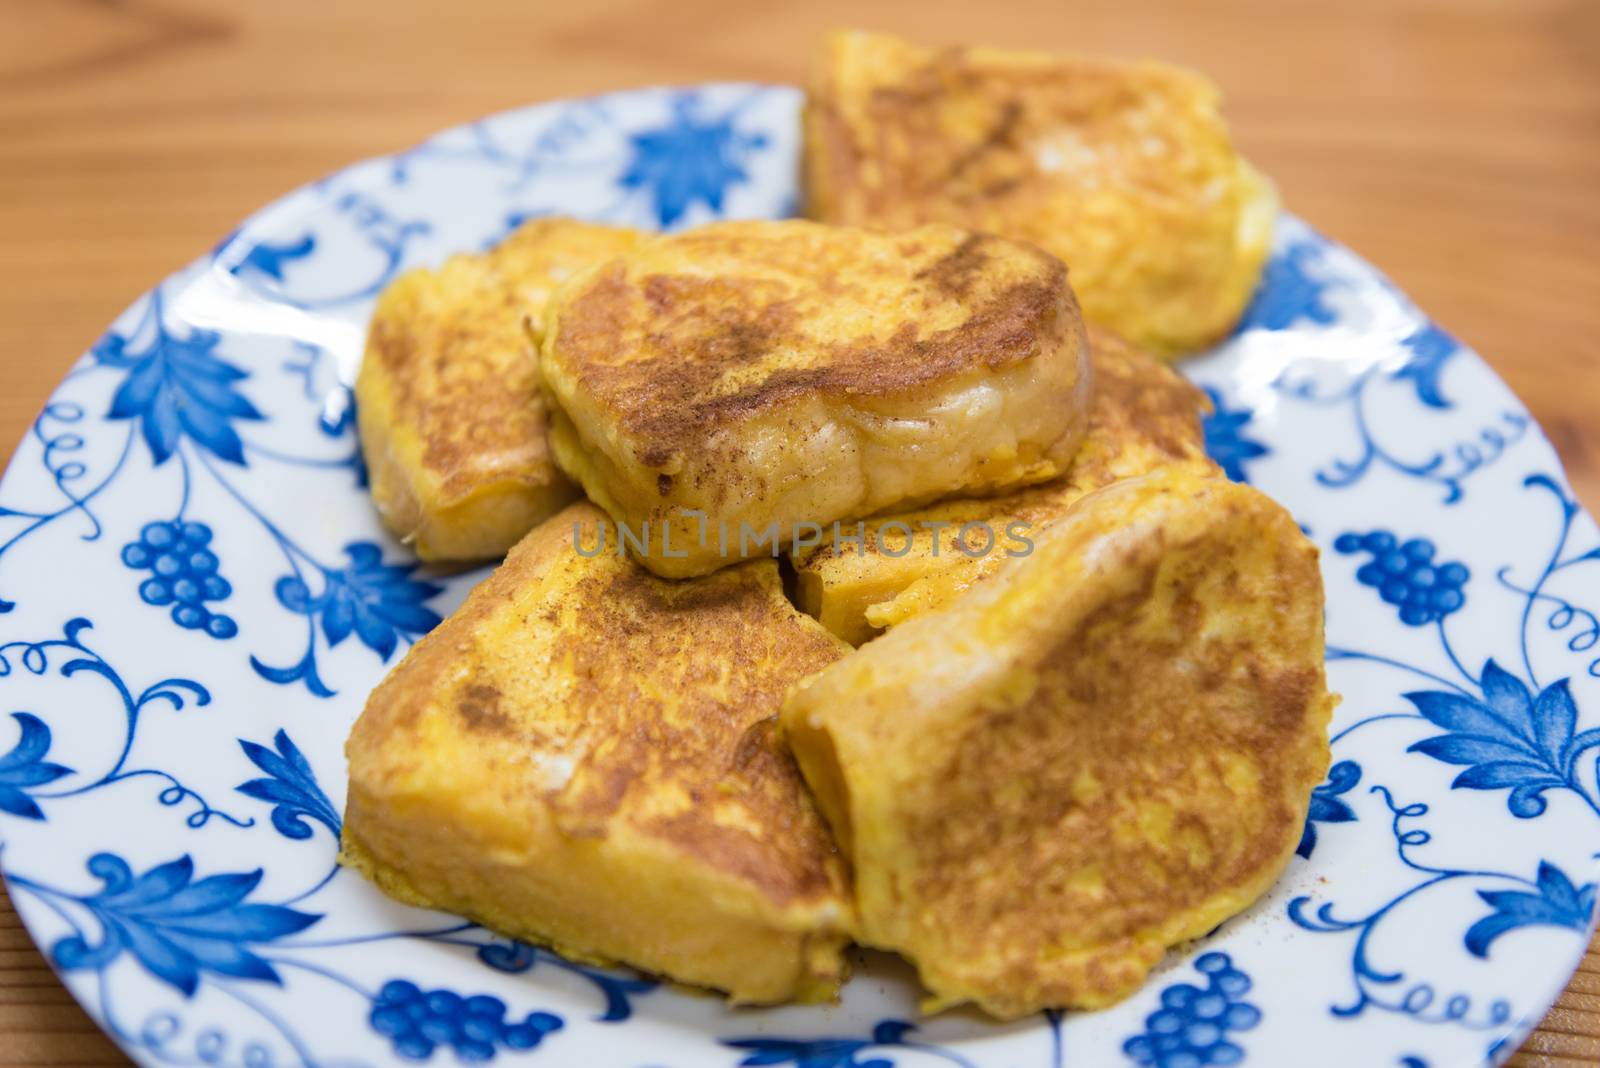 A plate of French toast on a white and blue floral designed plate on a wooden table background.